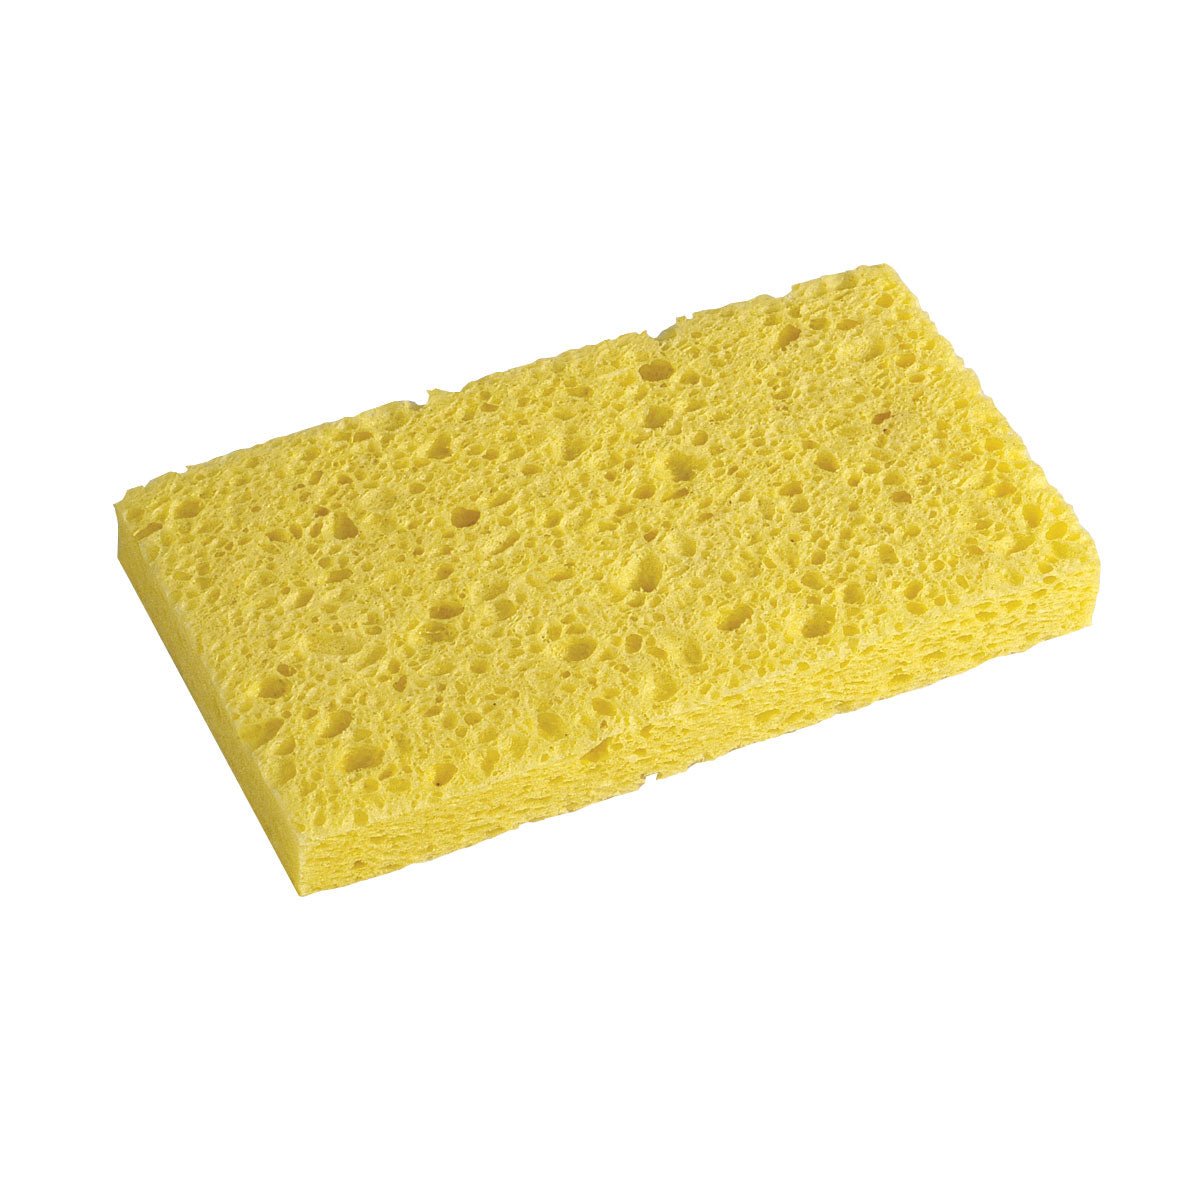 Replacement Sponge for MIcro - Mark Variable Temperature Soldering Station #84383 (3 pk)